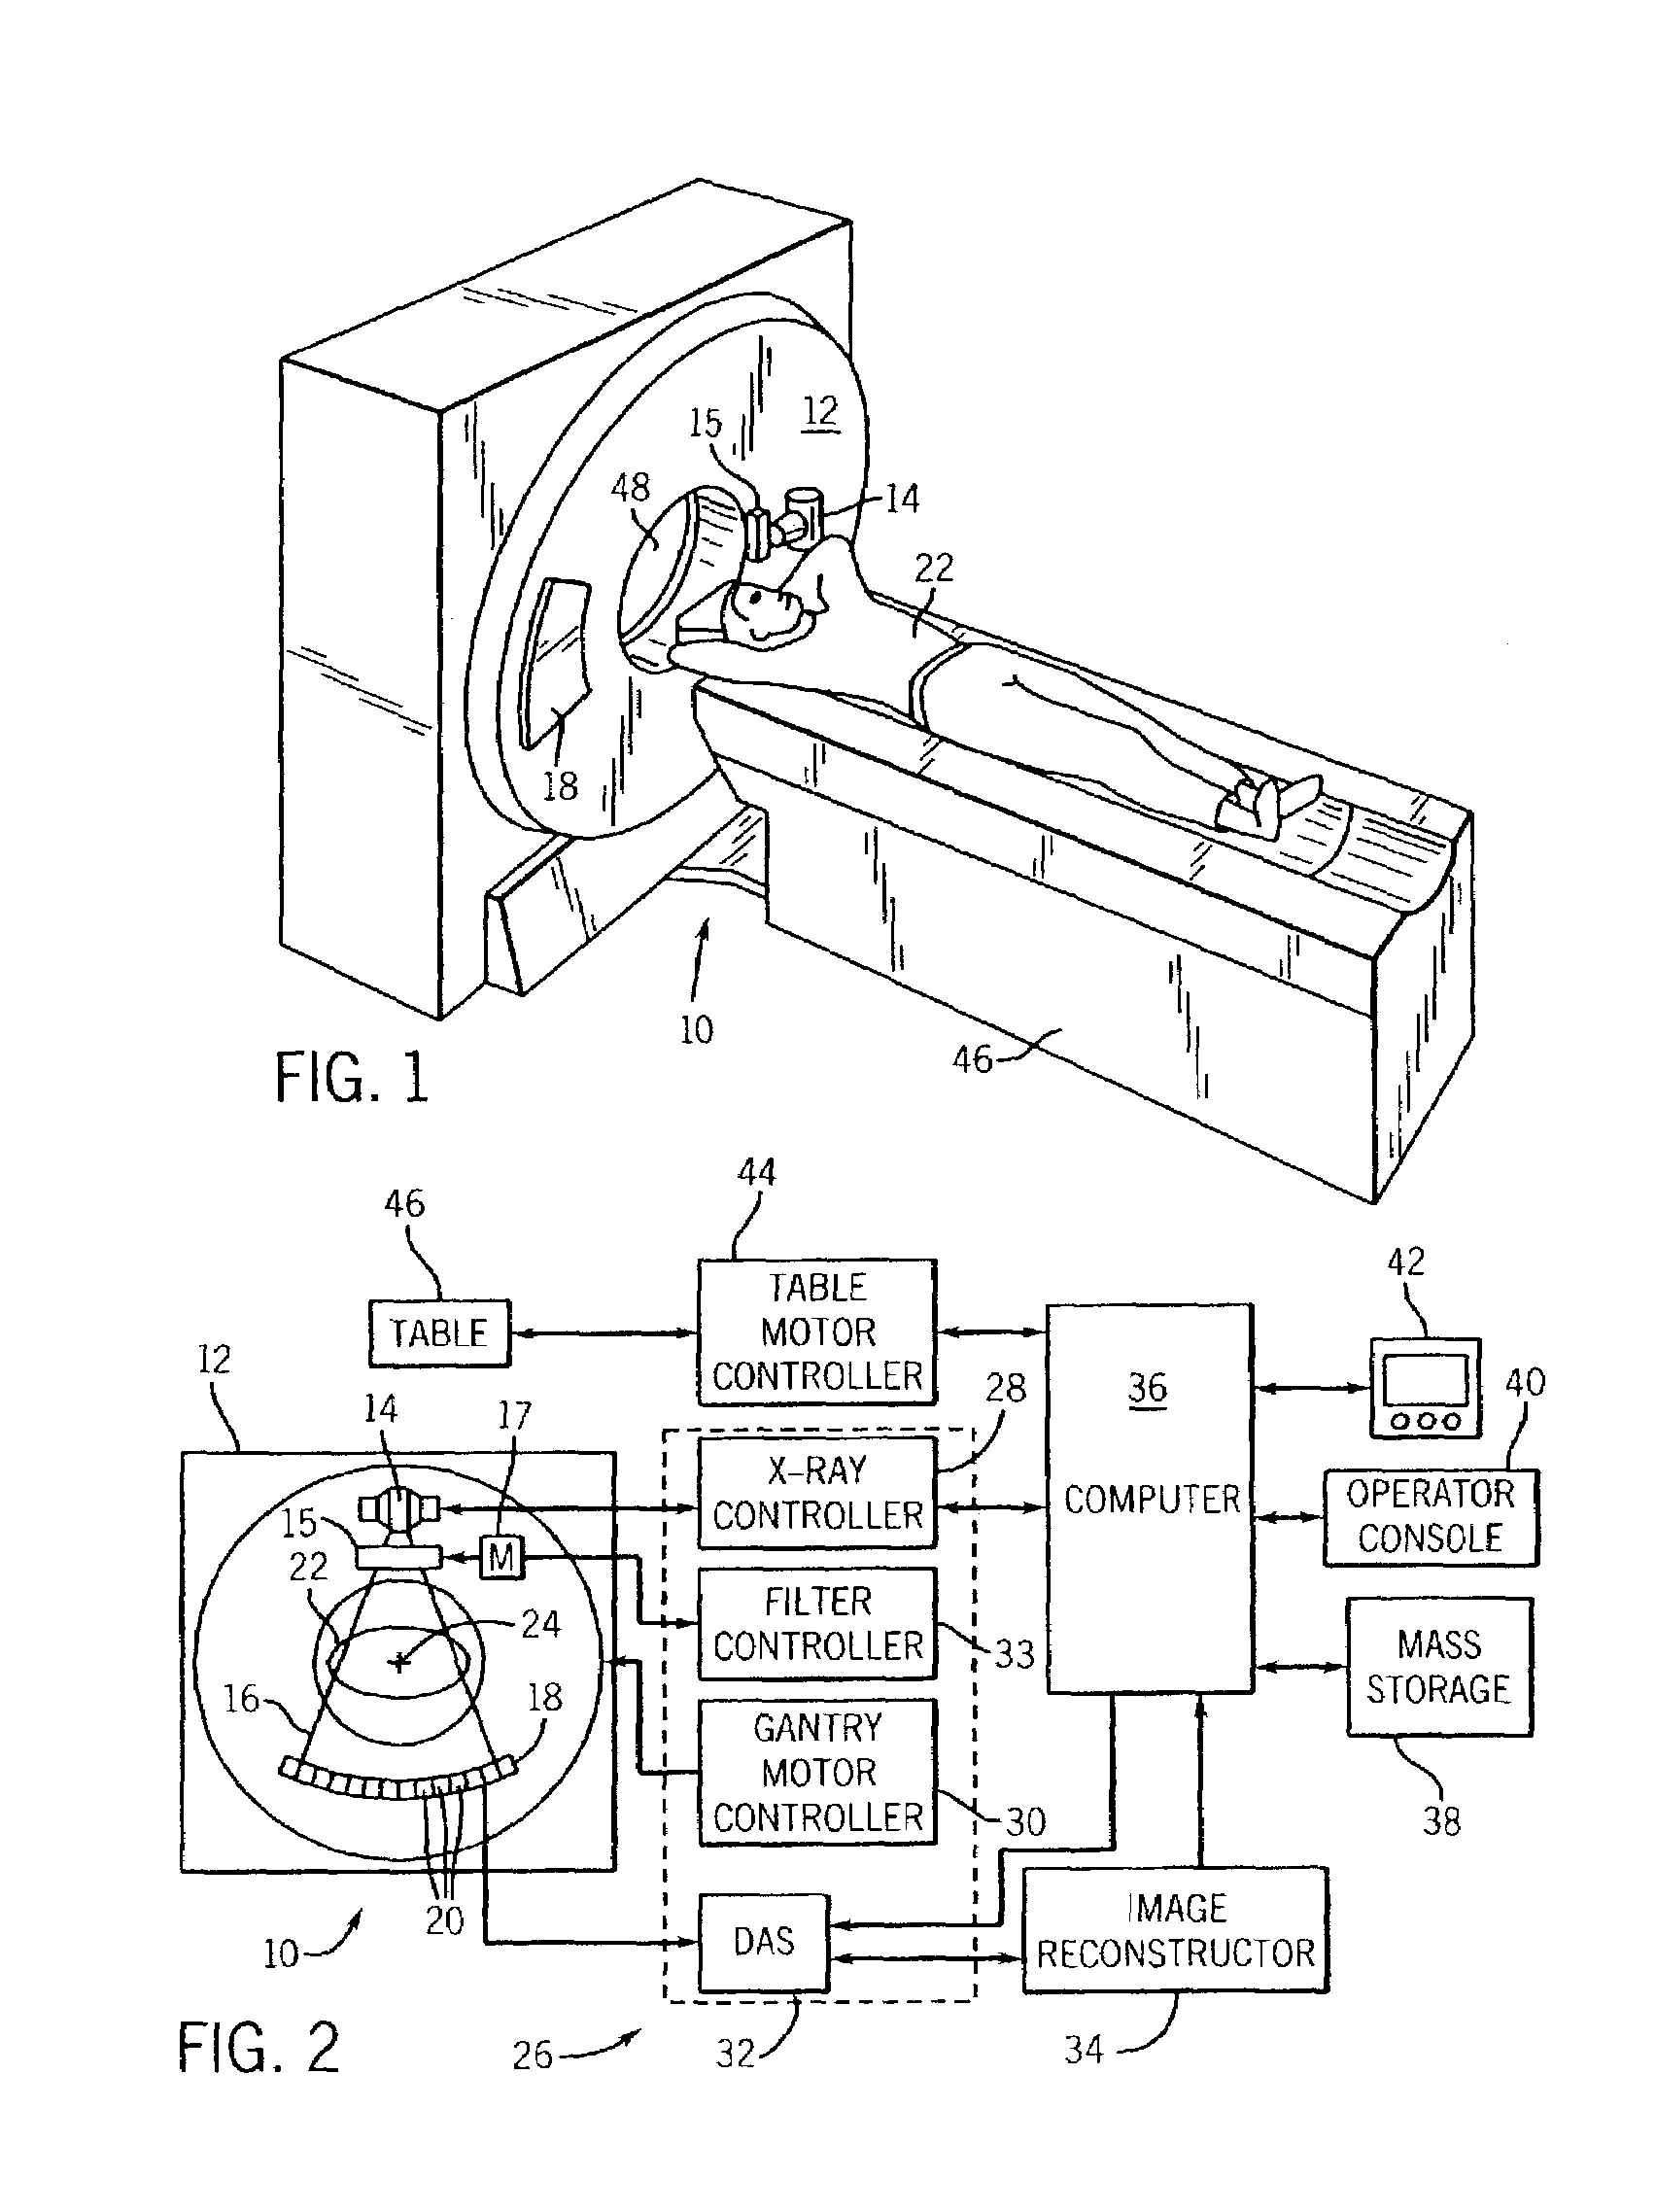 Method and apparatus for presenting multiple pre-subject filtering profiles during CT data acquisition